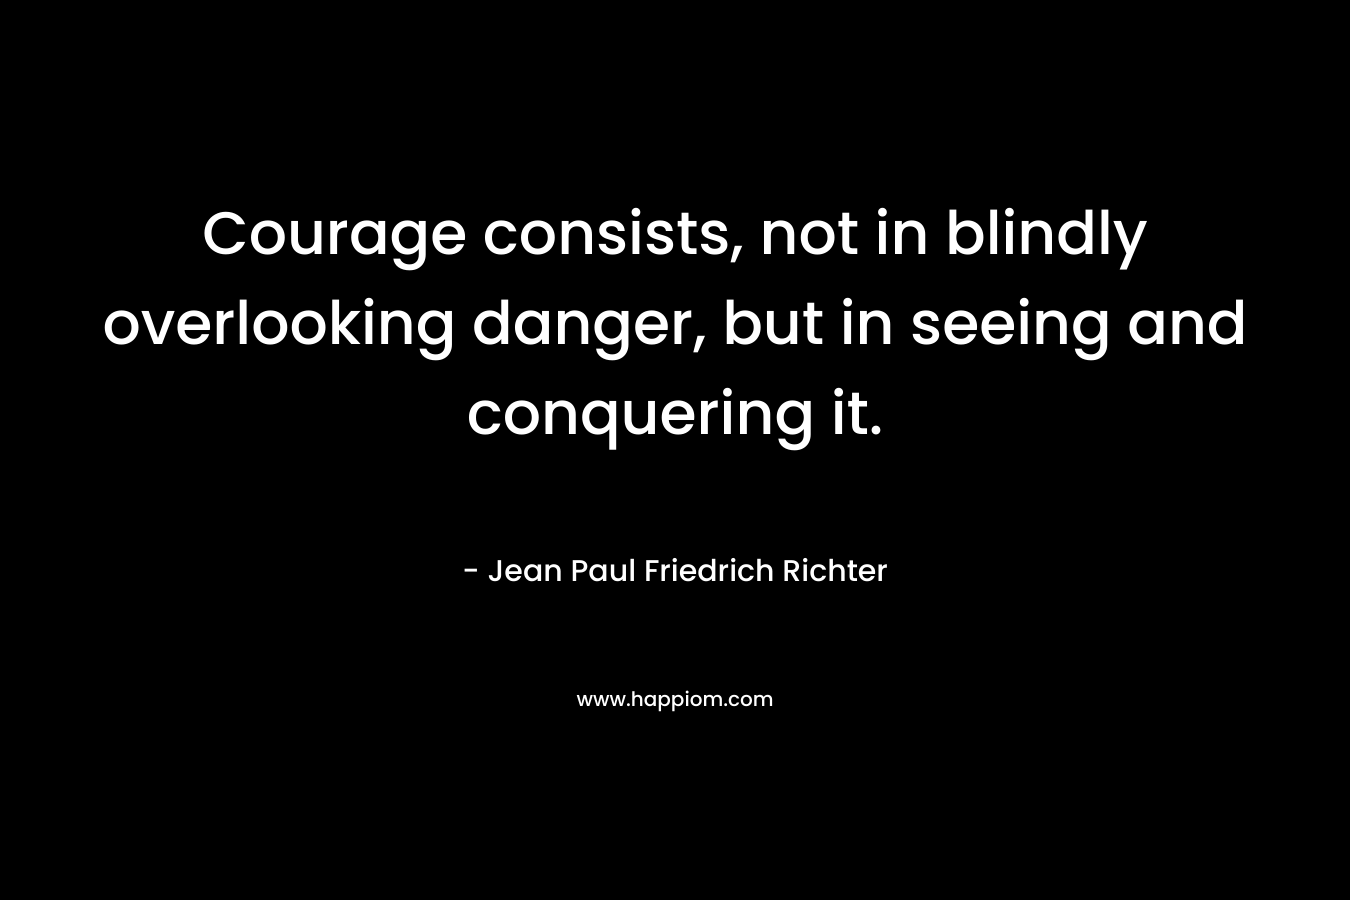 Courage consists, not in blindly overlooking danger, but in seeing and conquering it.